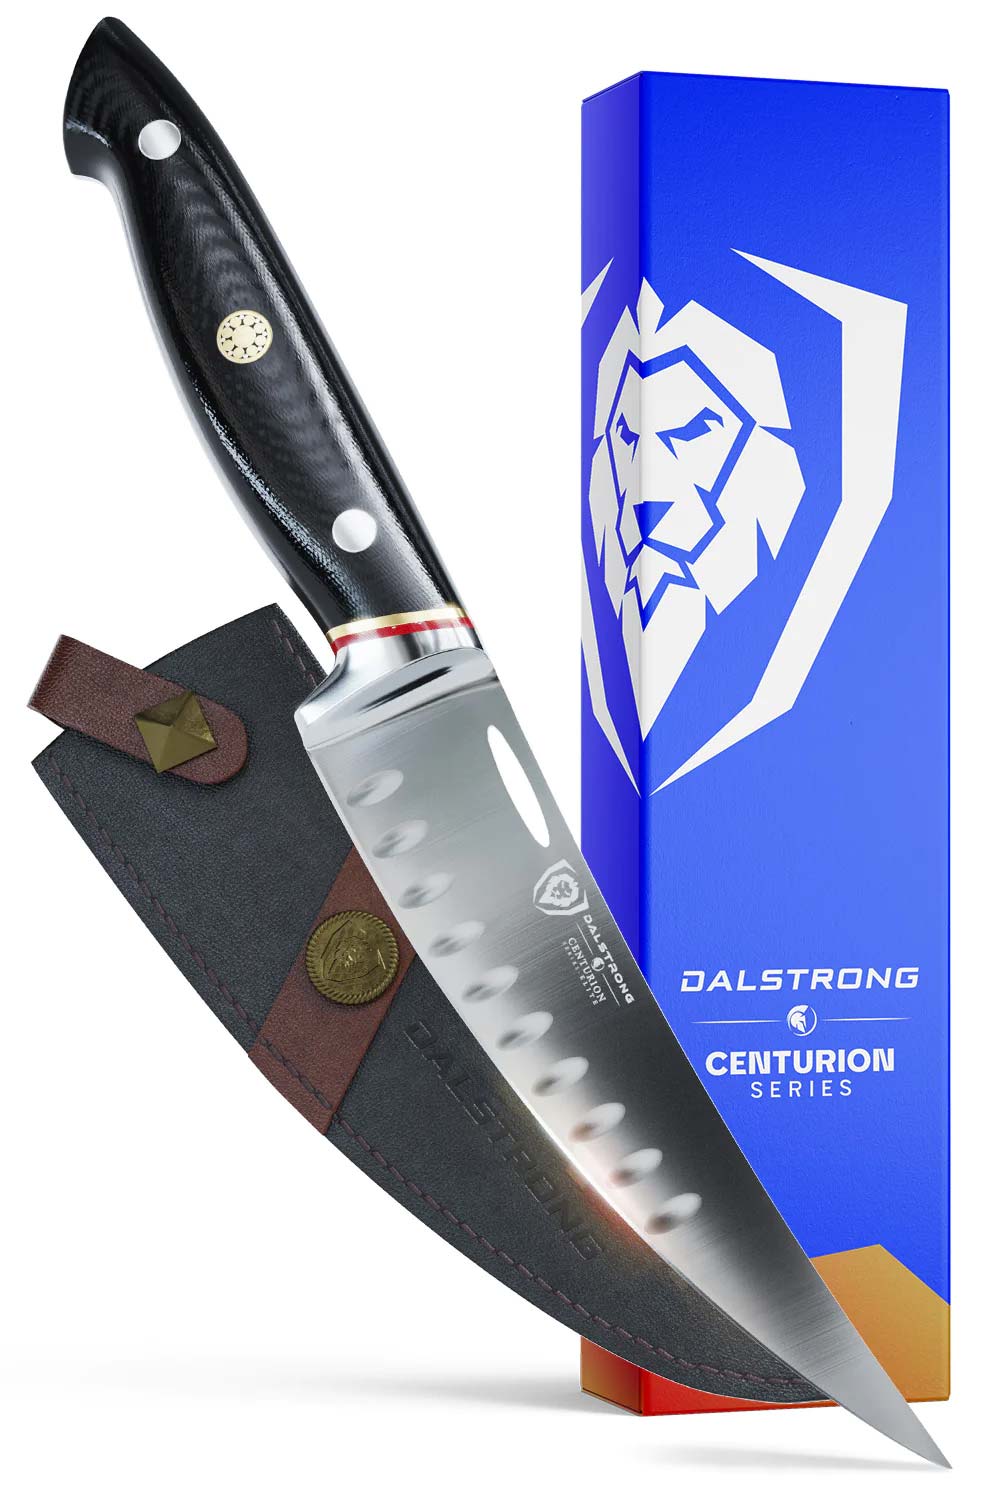 Dalstrong centurion series 6 inch curved boning knife in front of it's premium packaging.